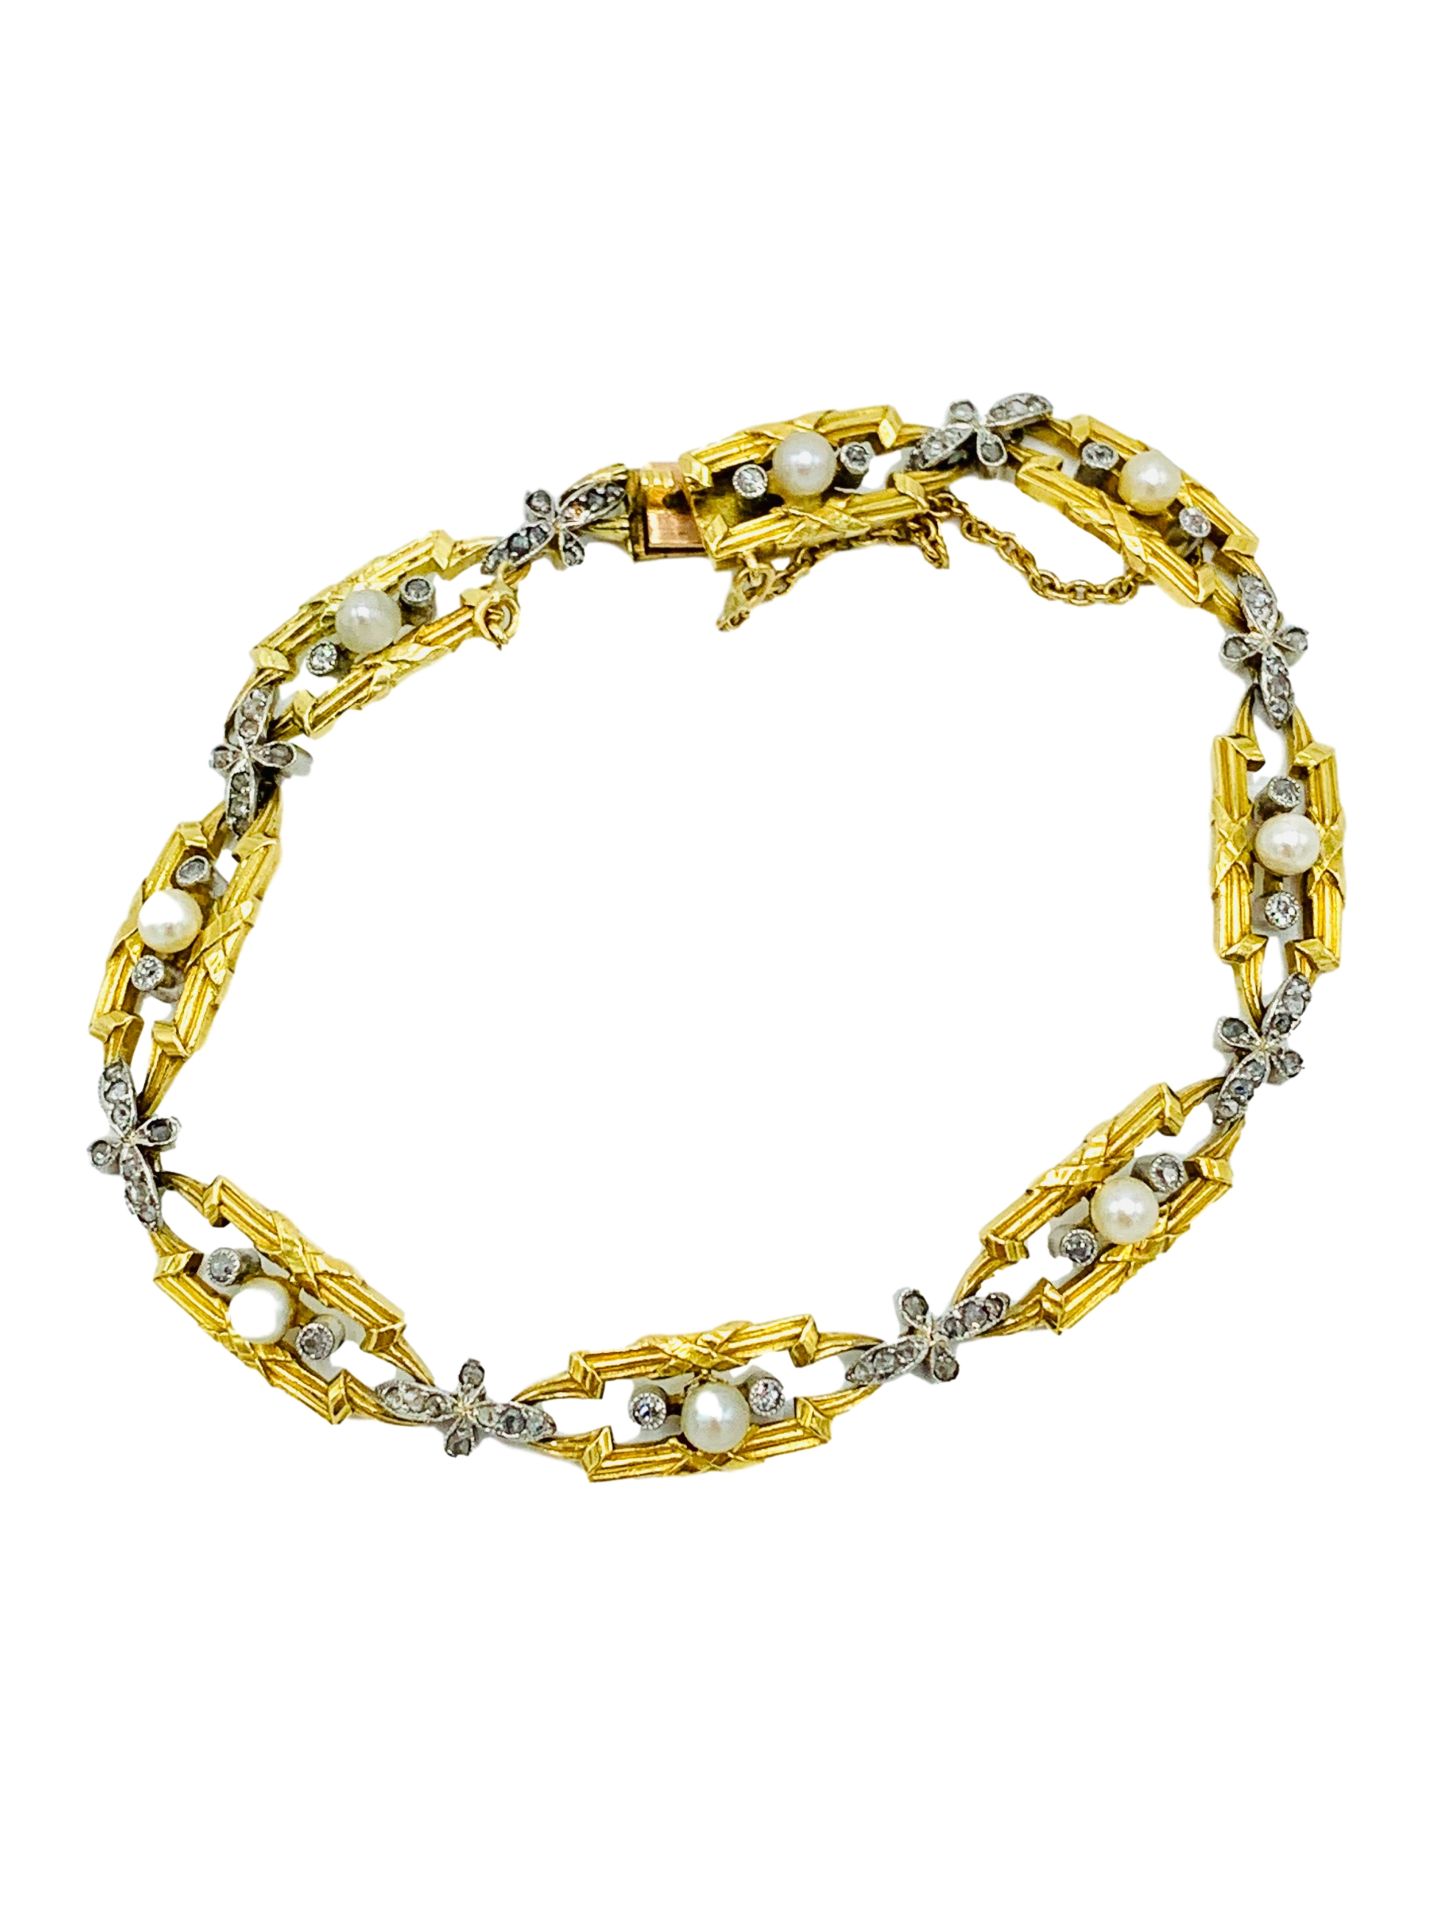 18ct gold pearl and diamond bracelet. - Image 2 of 6